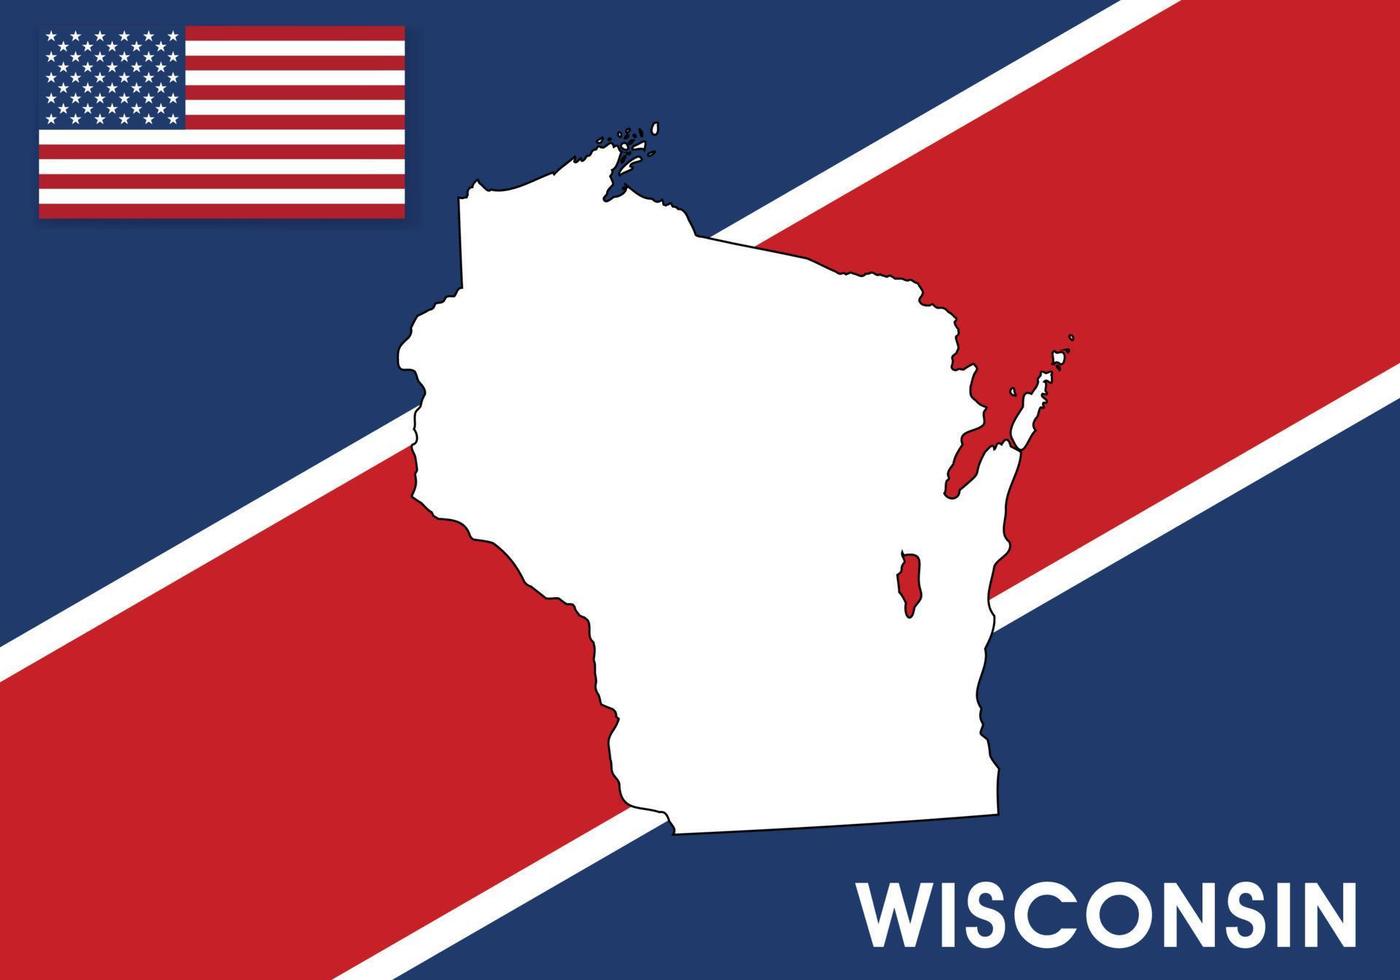 Wisconsin - USA, United States of America Map vector template. white color map on flag background for design, infographic - Vector illustration eps 10